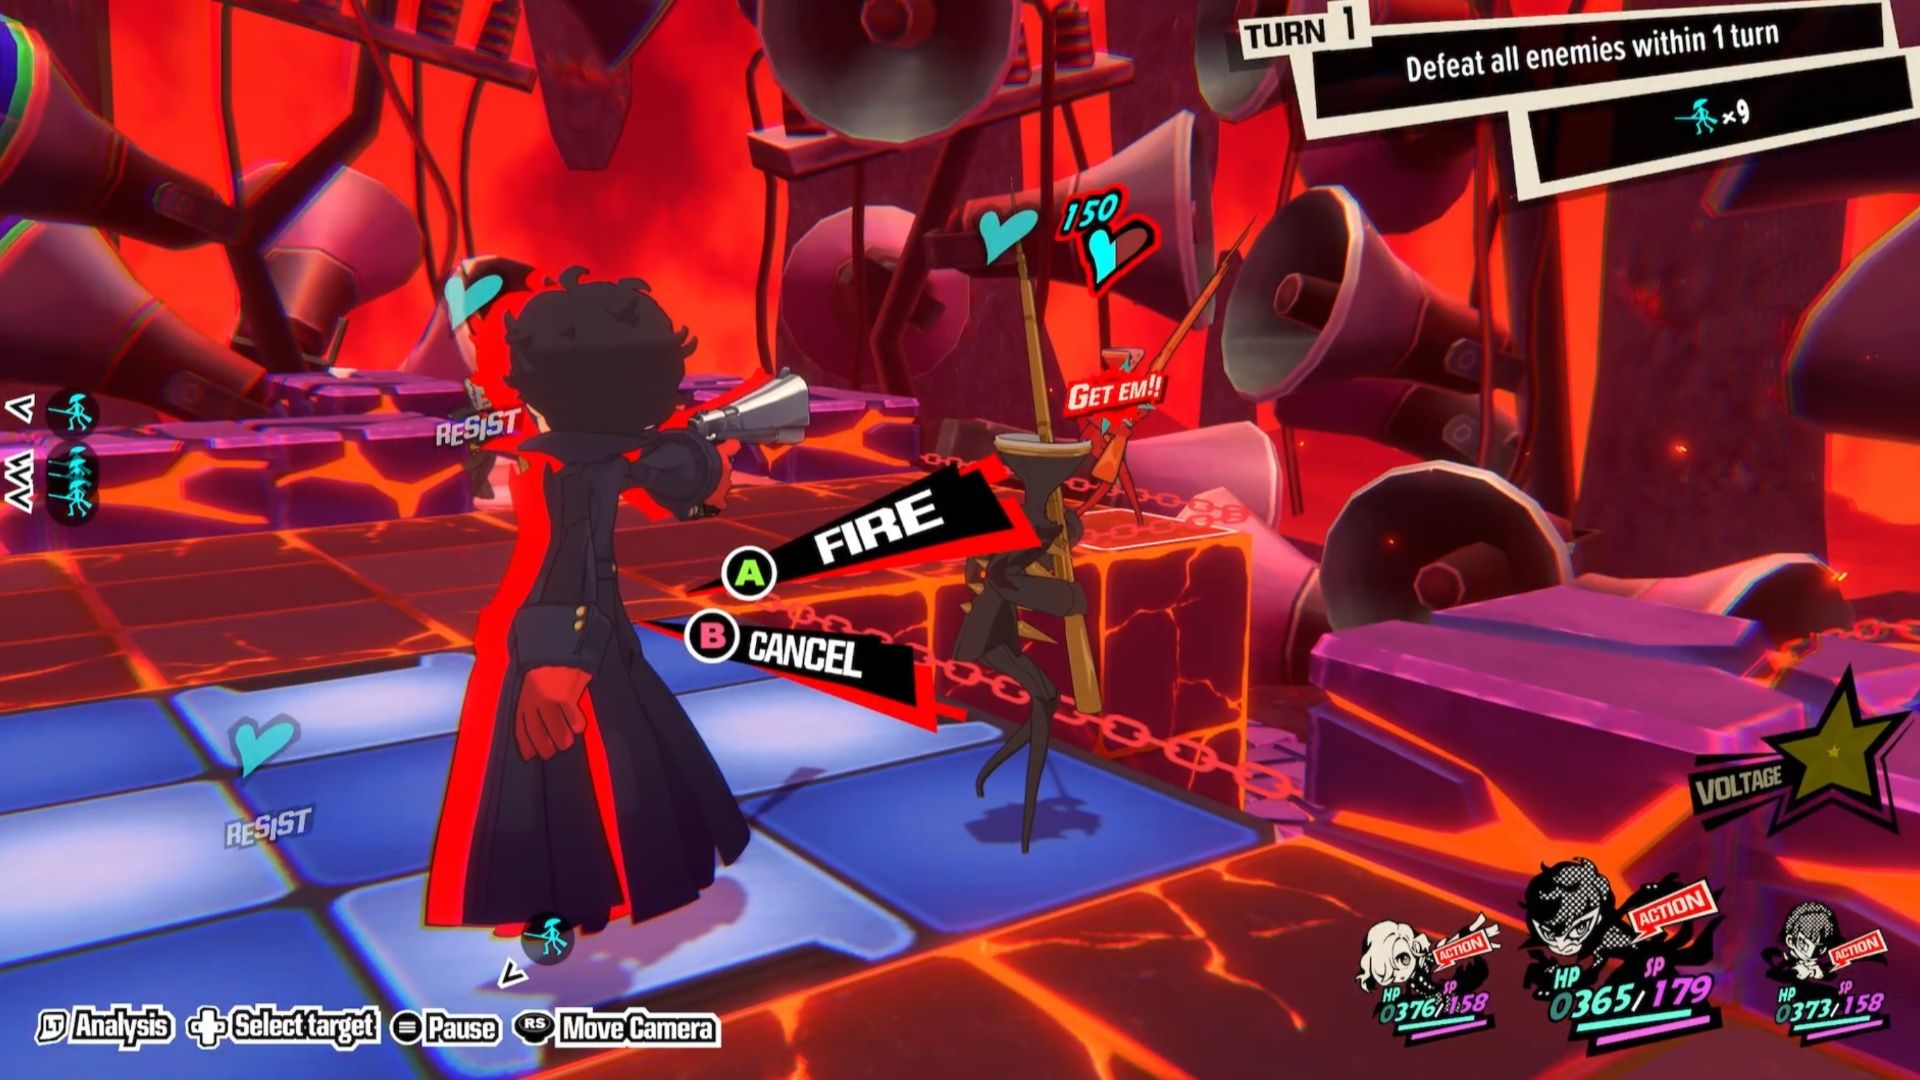 Joker points his gun at an enemy toward the south end of the arena during Quest 16 in Persona 5 Tactica.